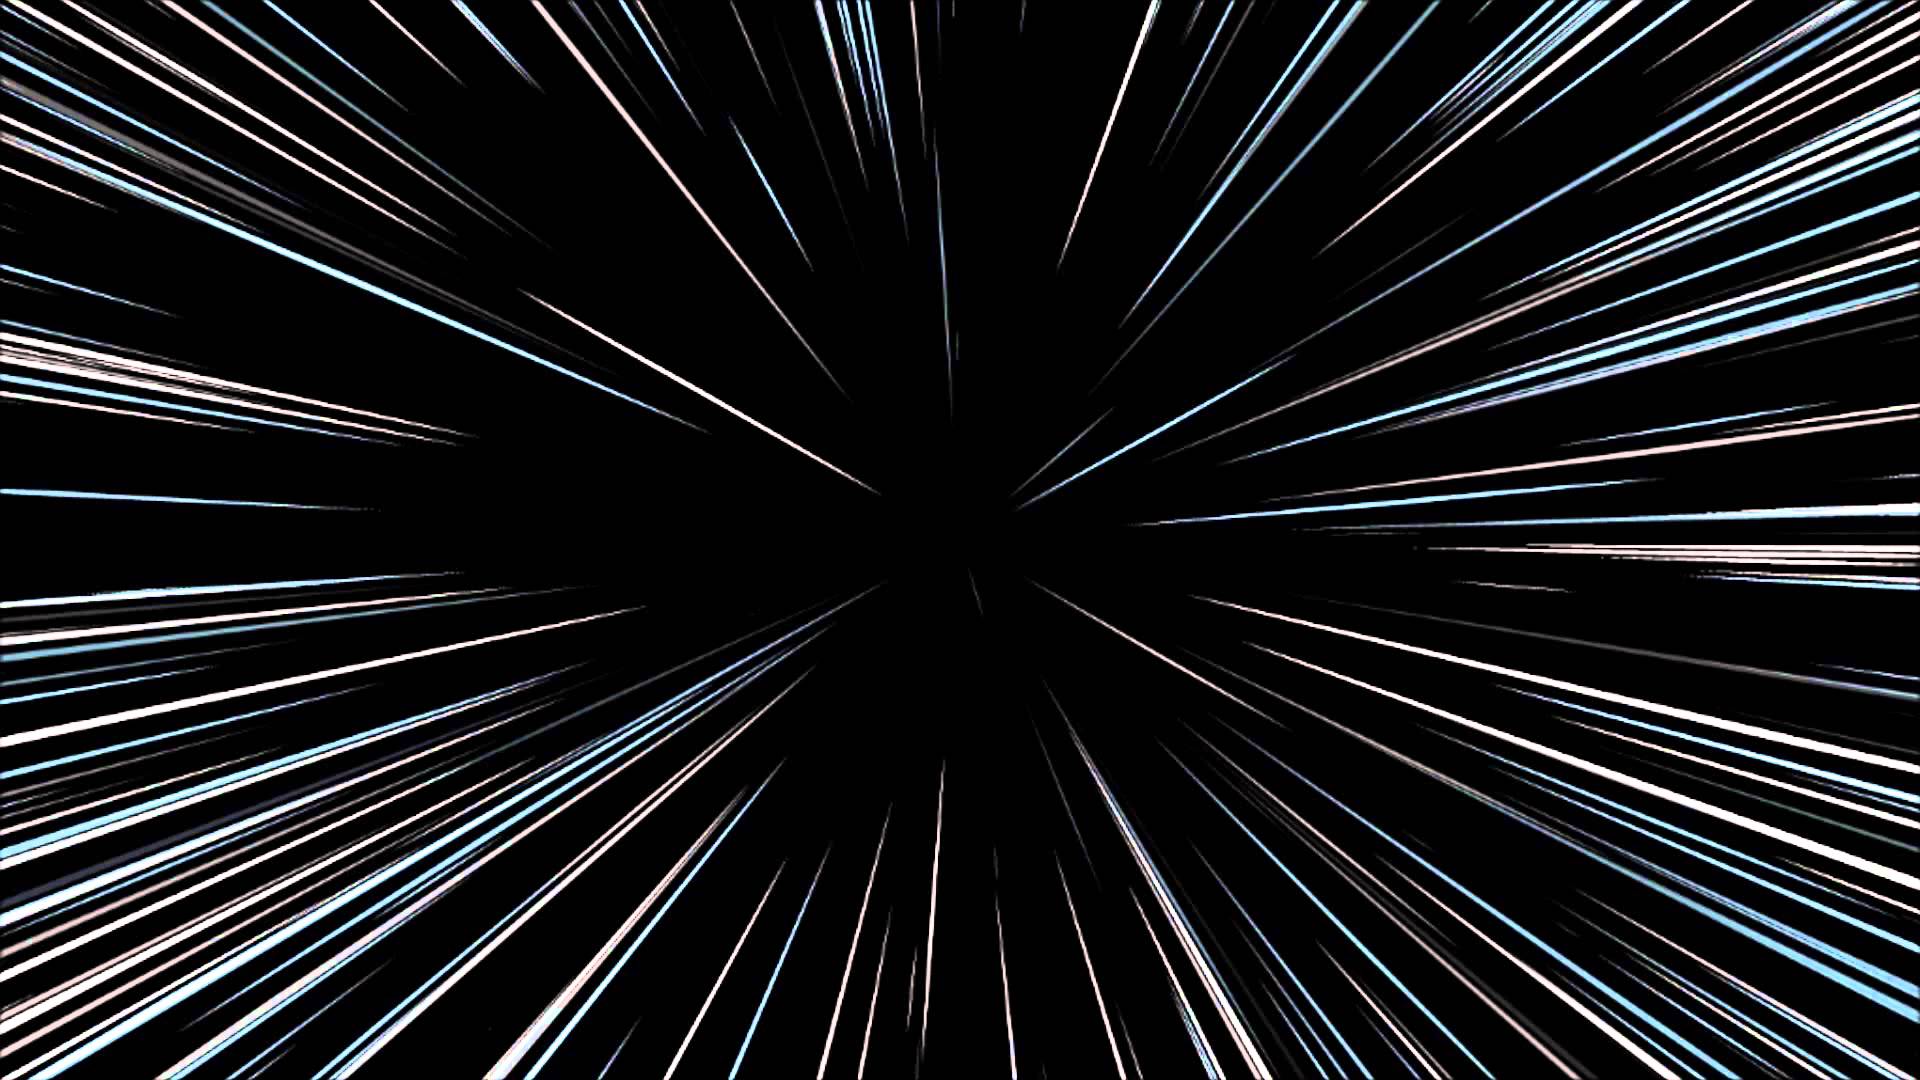 star wars jump to lightspeed in reverse as viewed from rear of ...